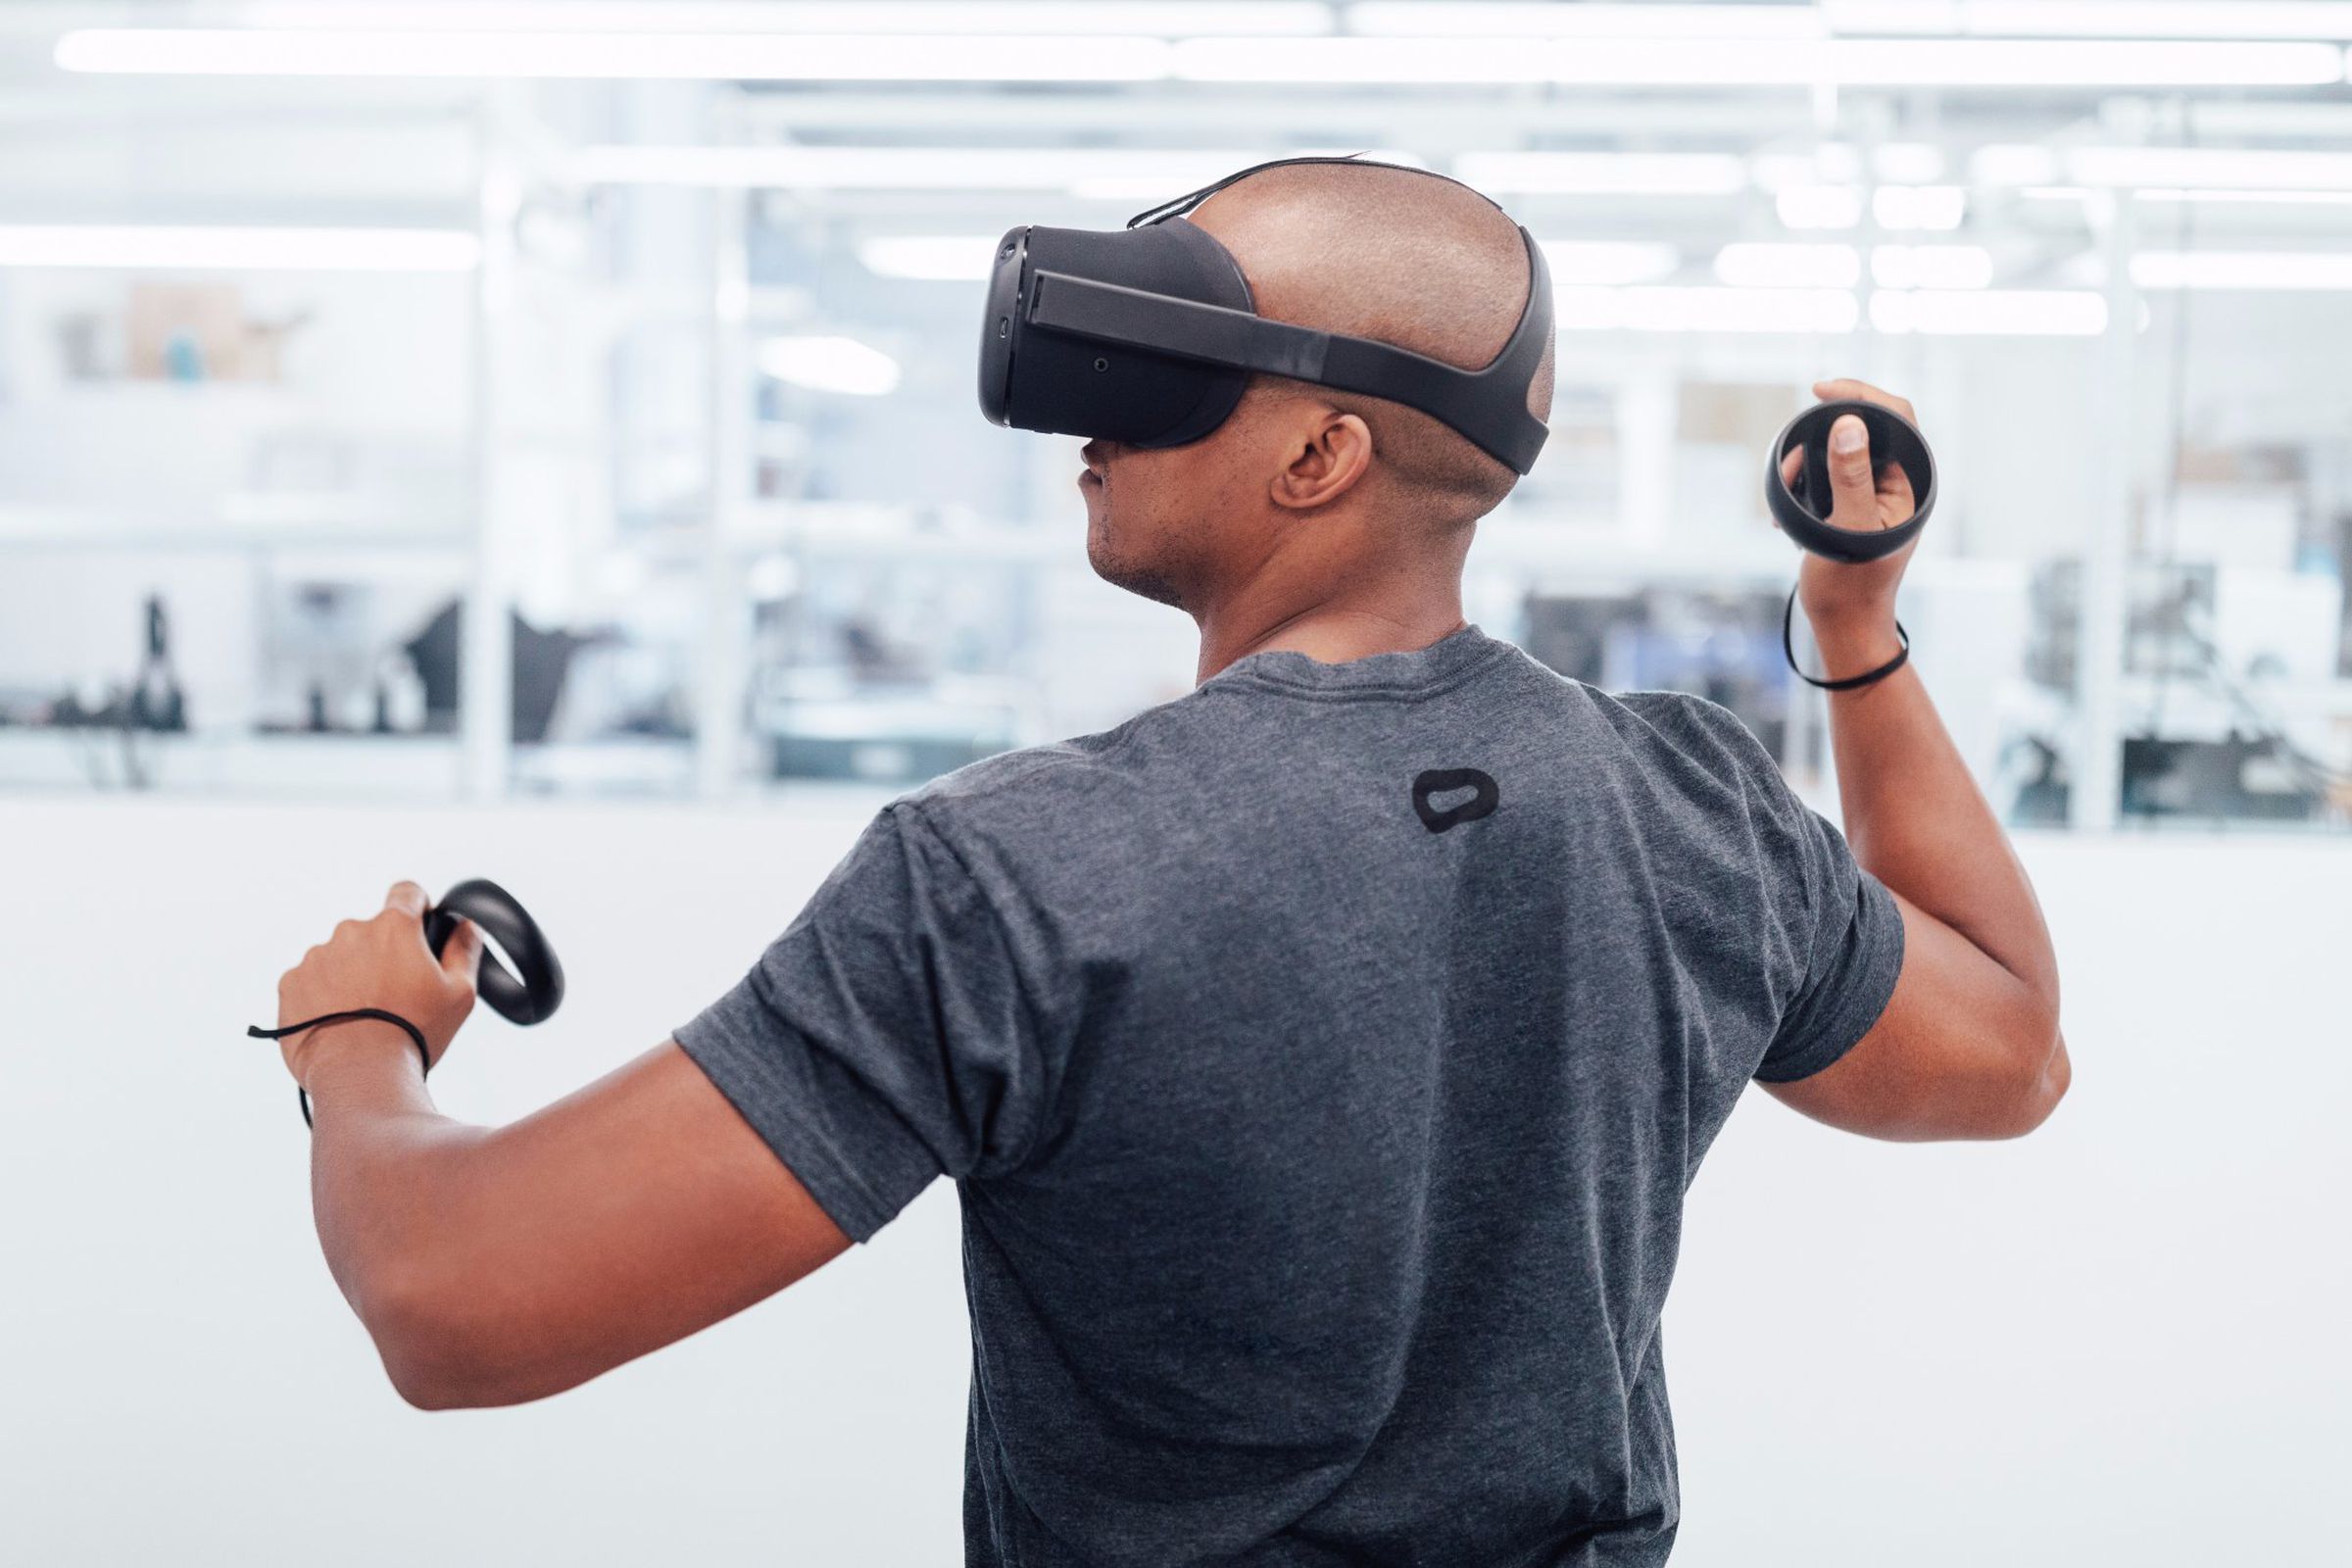 Oculus’ Santa Cruz prototype is a self-contained headset that uses inside-out tracking.